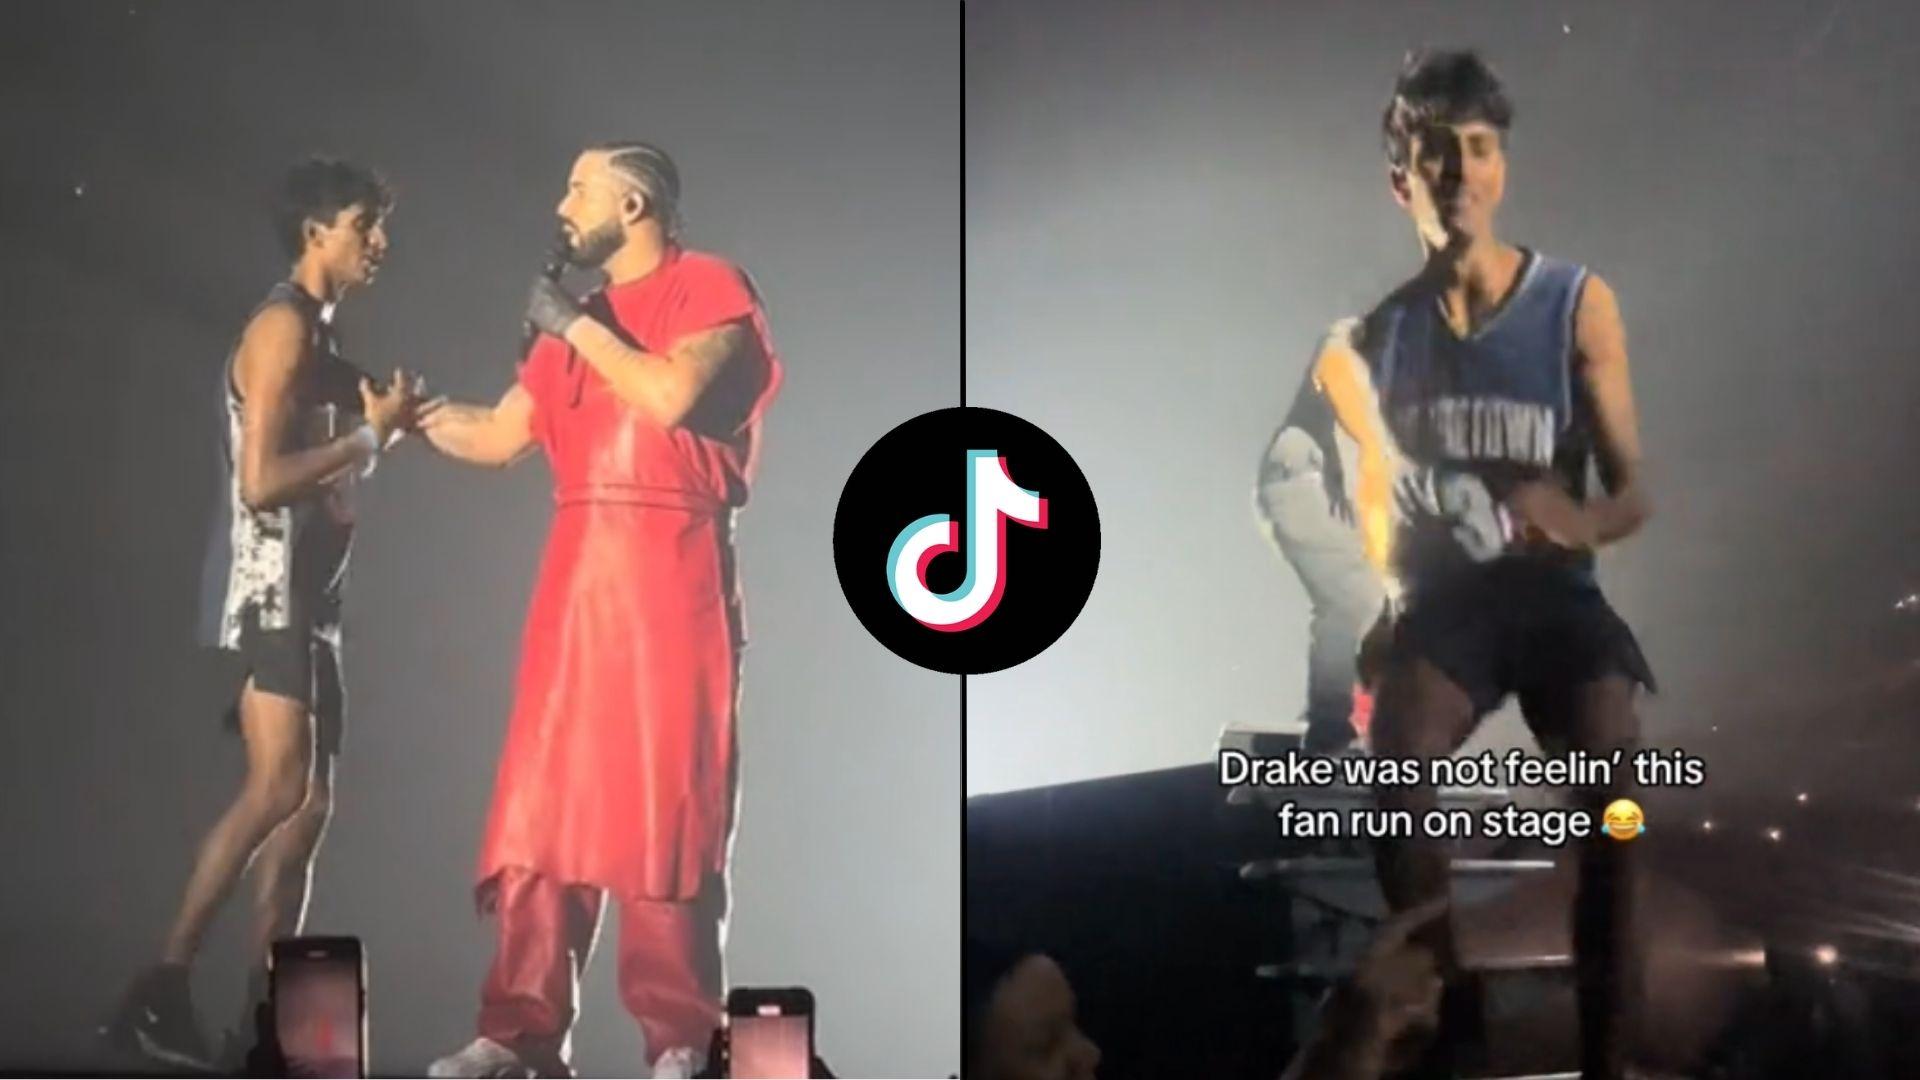 Screenshots of Drake fan getting on stage with rapper and being pushed off